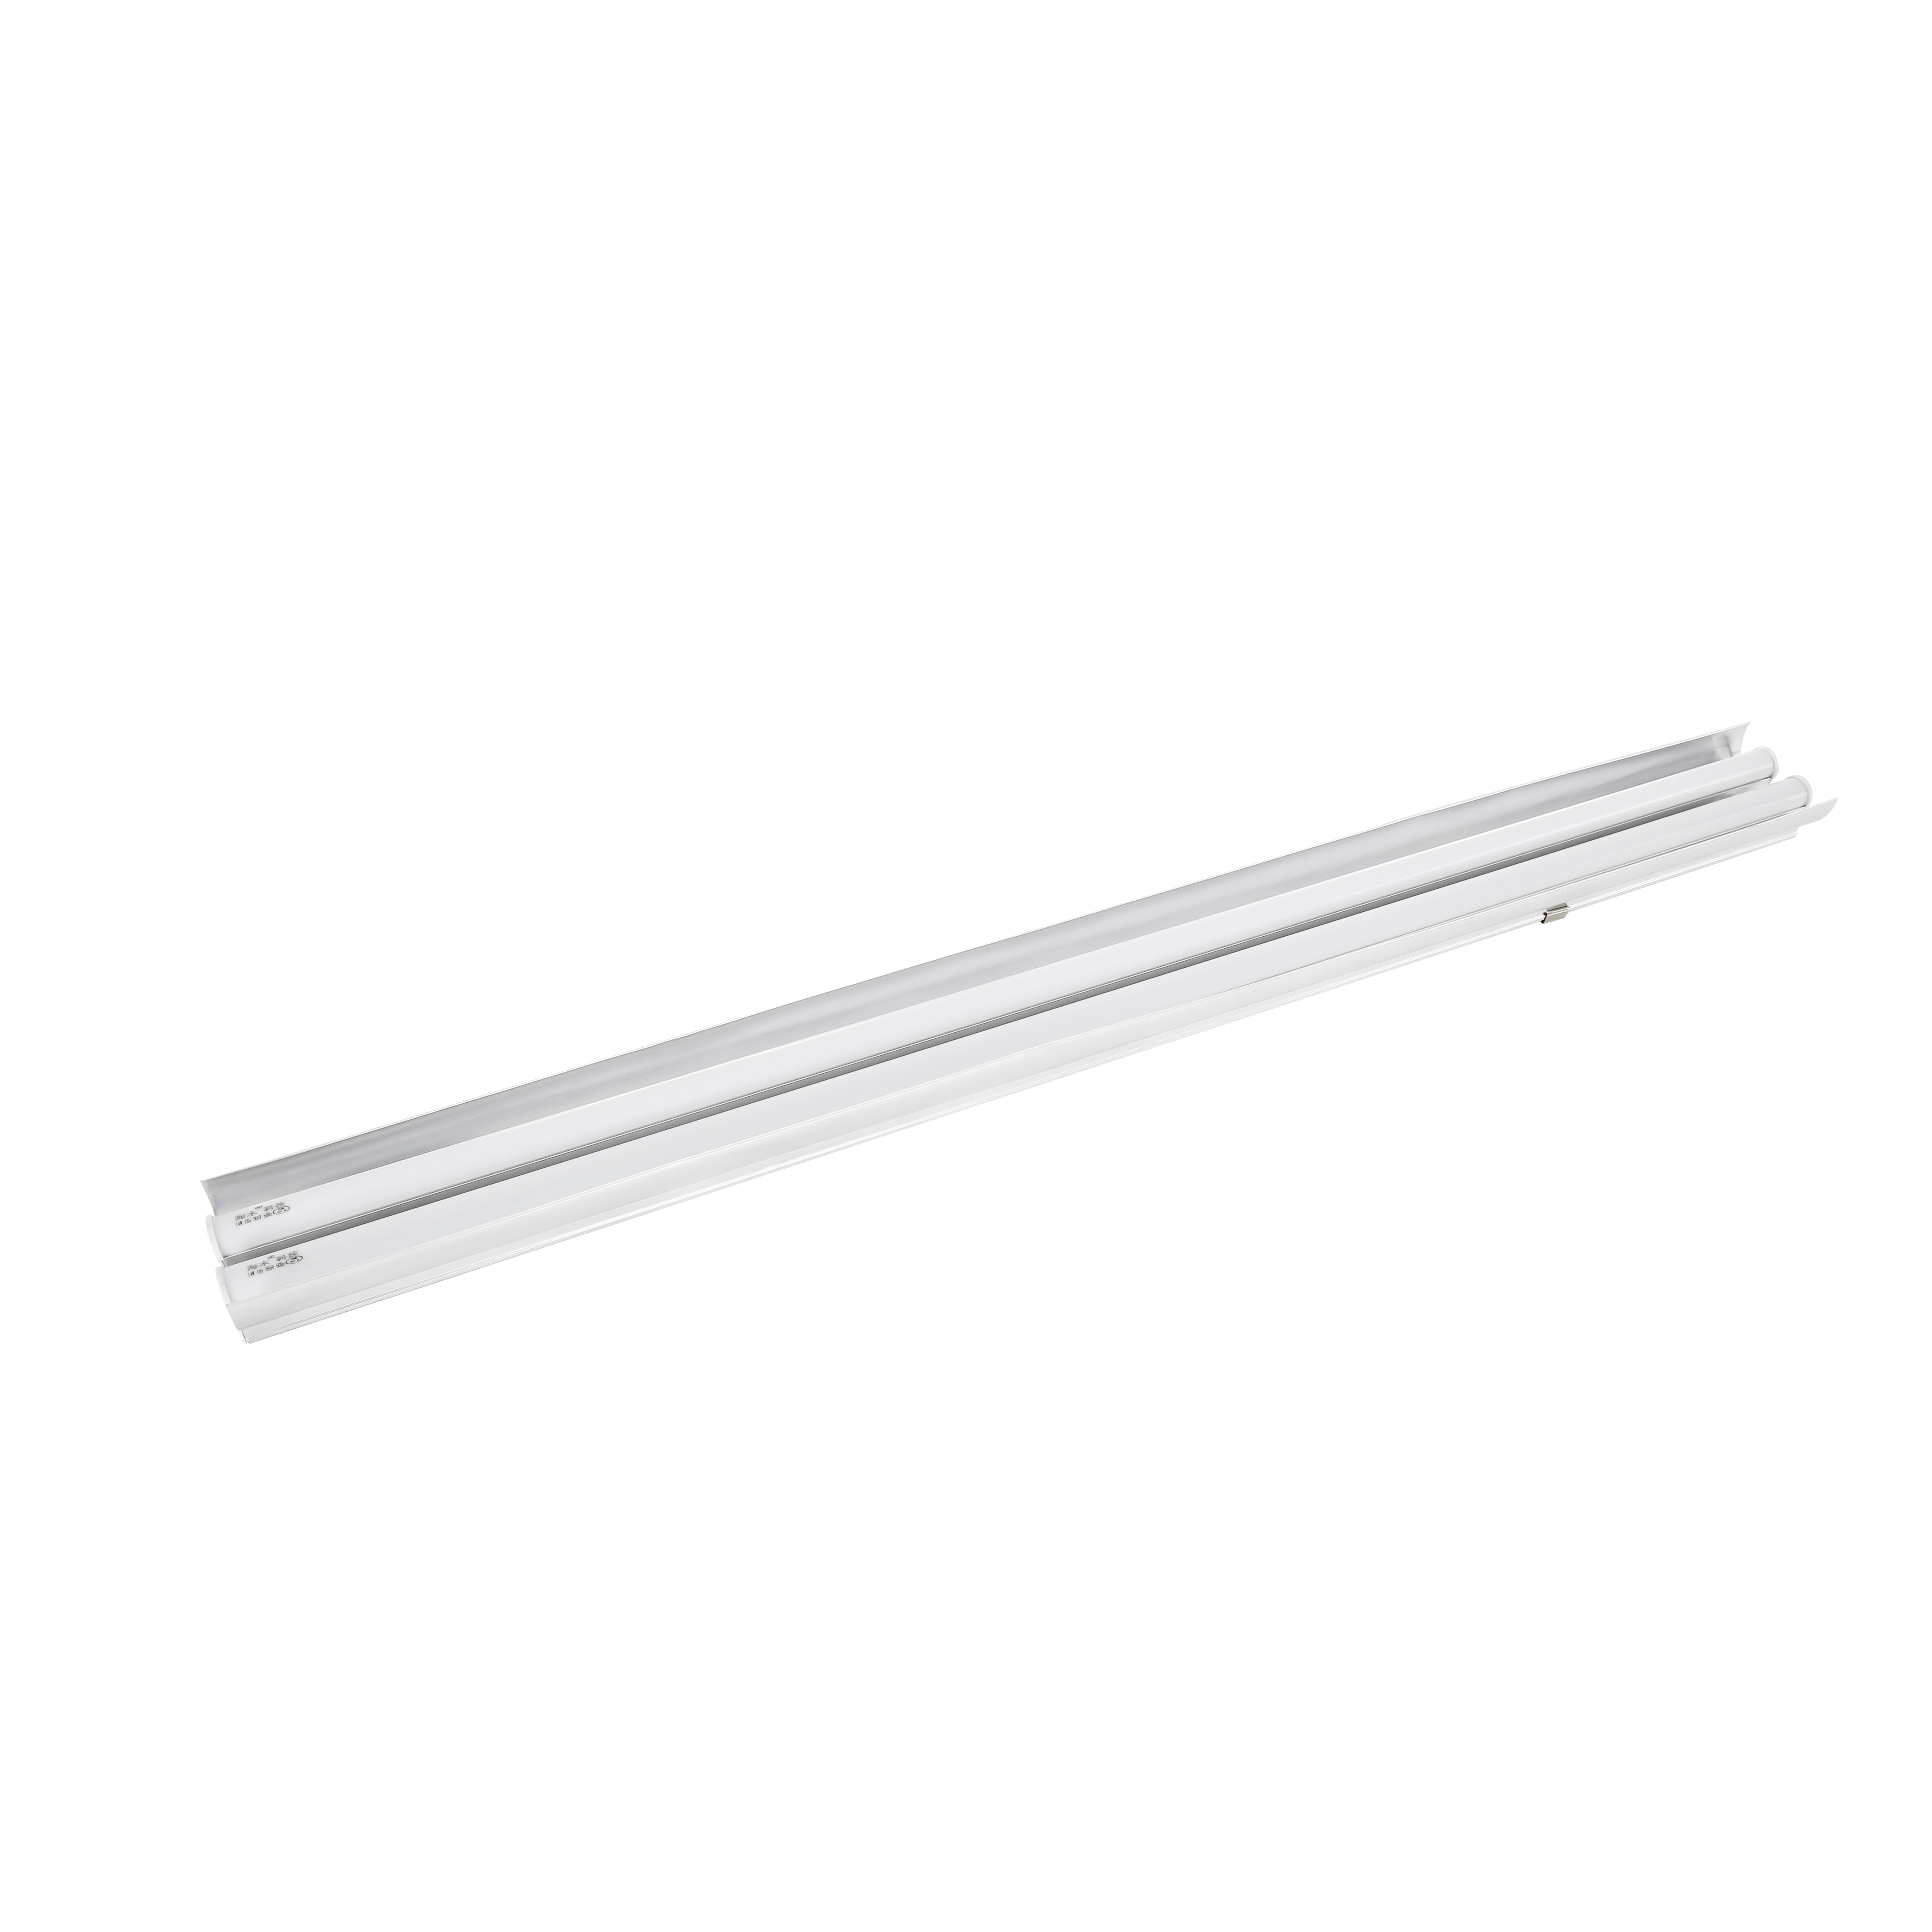 HM-T5(LED) with double bracket